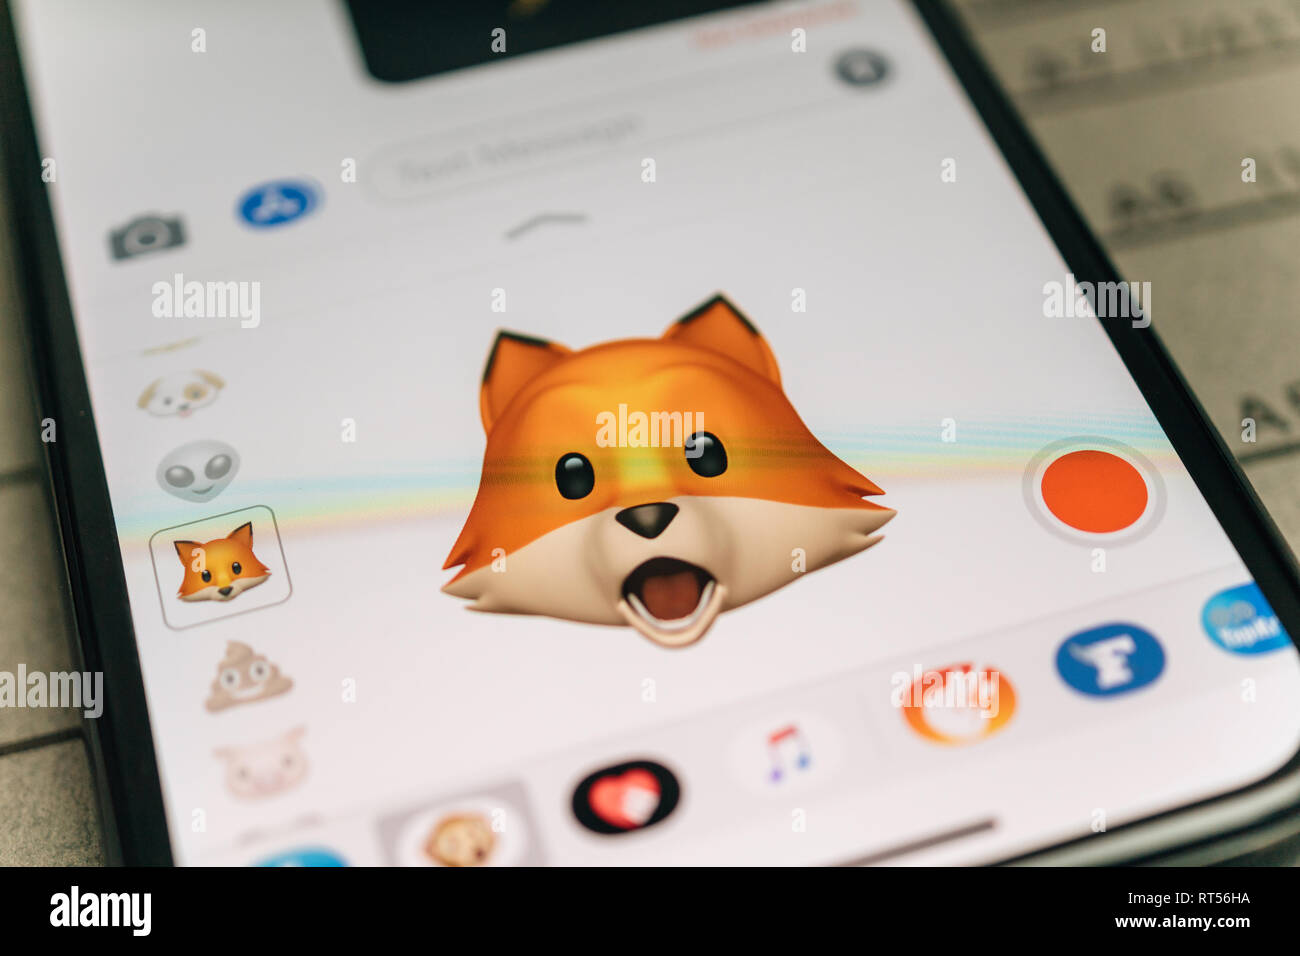 PARIS, FRANCE - NOV 9 2017: Fox animal 3d animoji emoji generated by Face ID facial recognition system with wow astonished face emotion close-up of the new iphone X 10 Display - tilt-shift lens used  Stock Photo